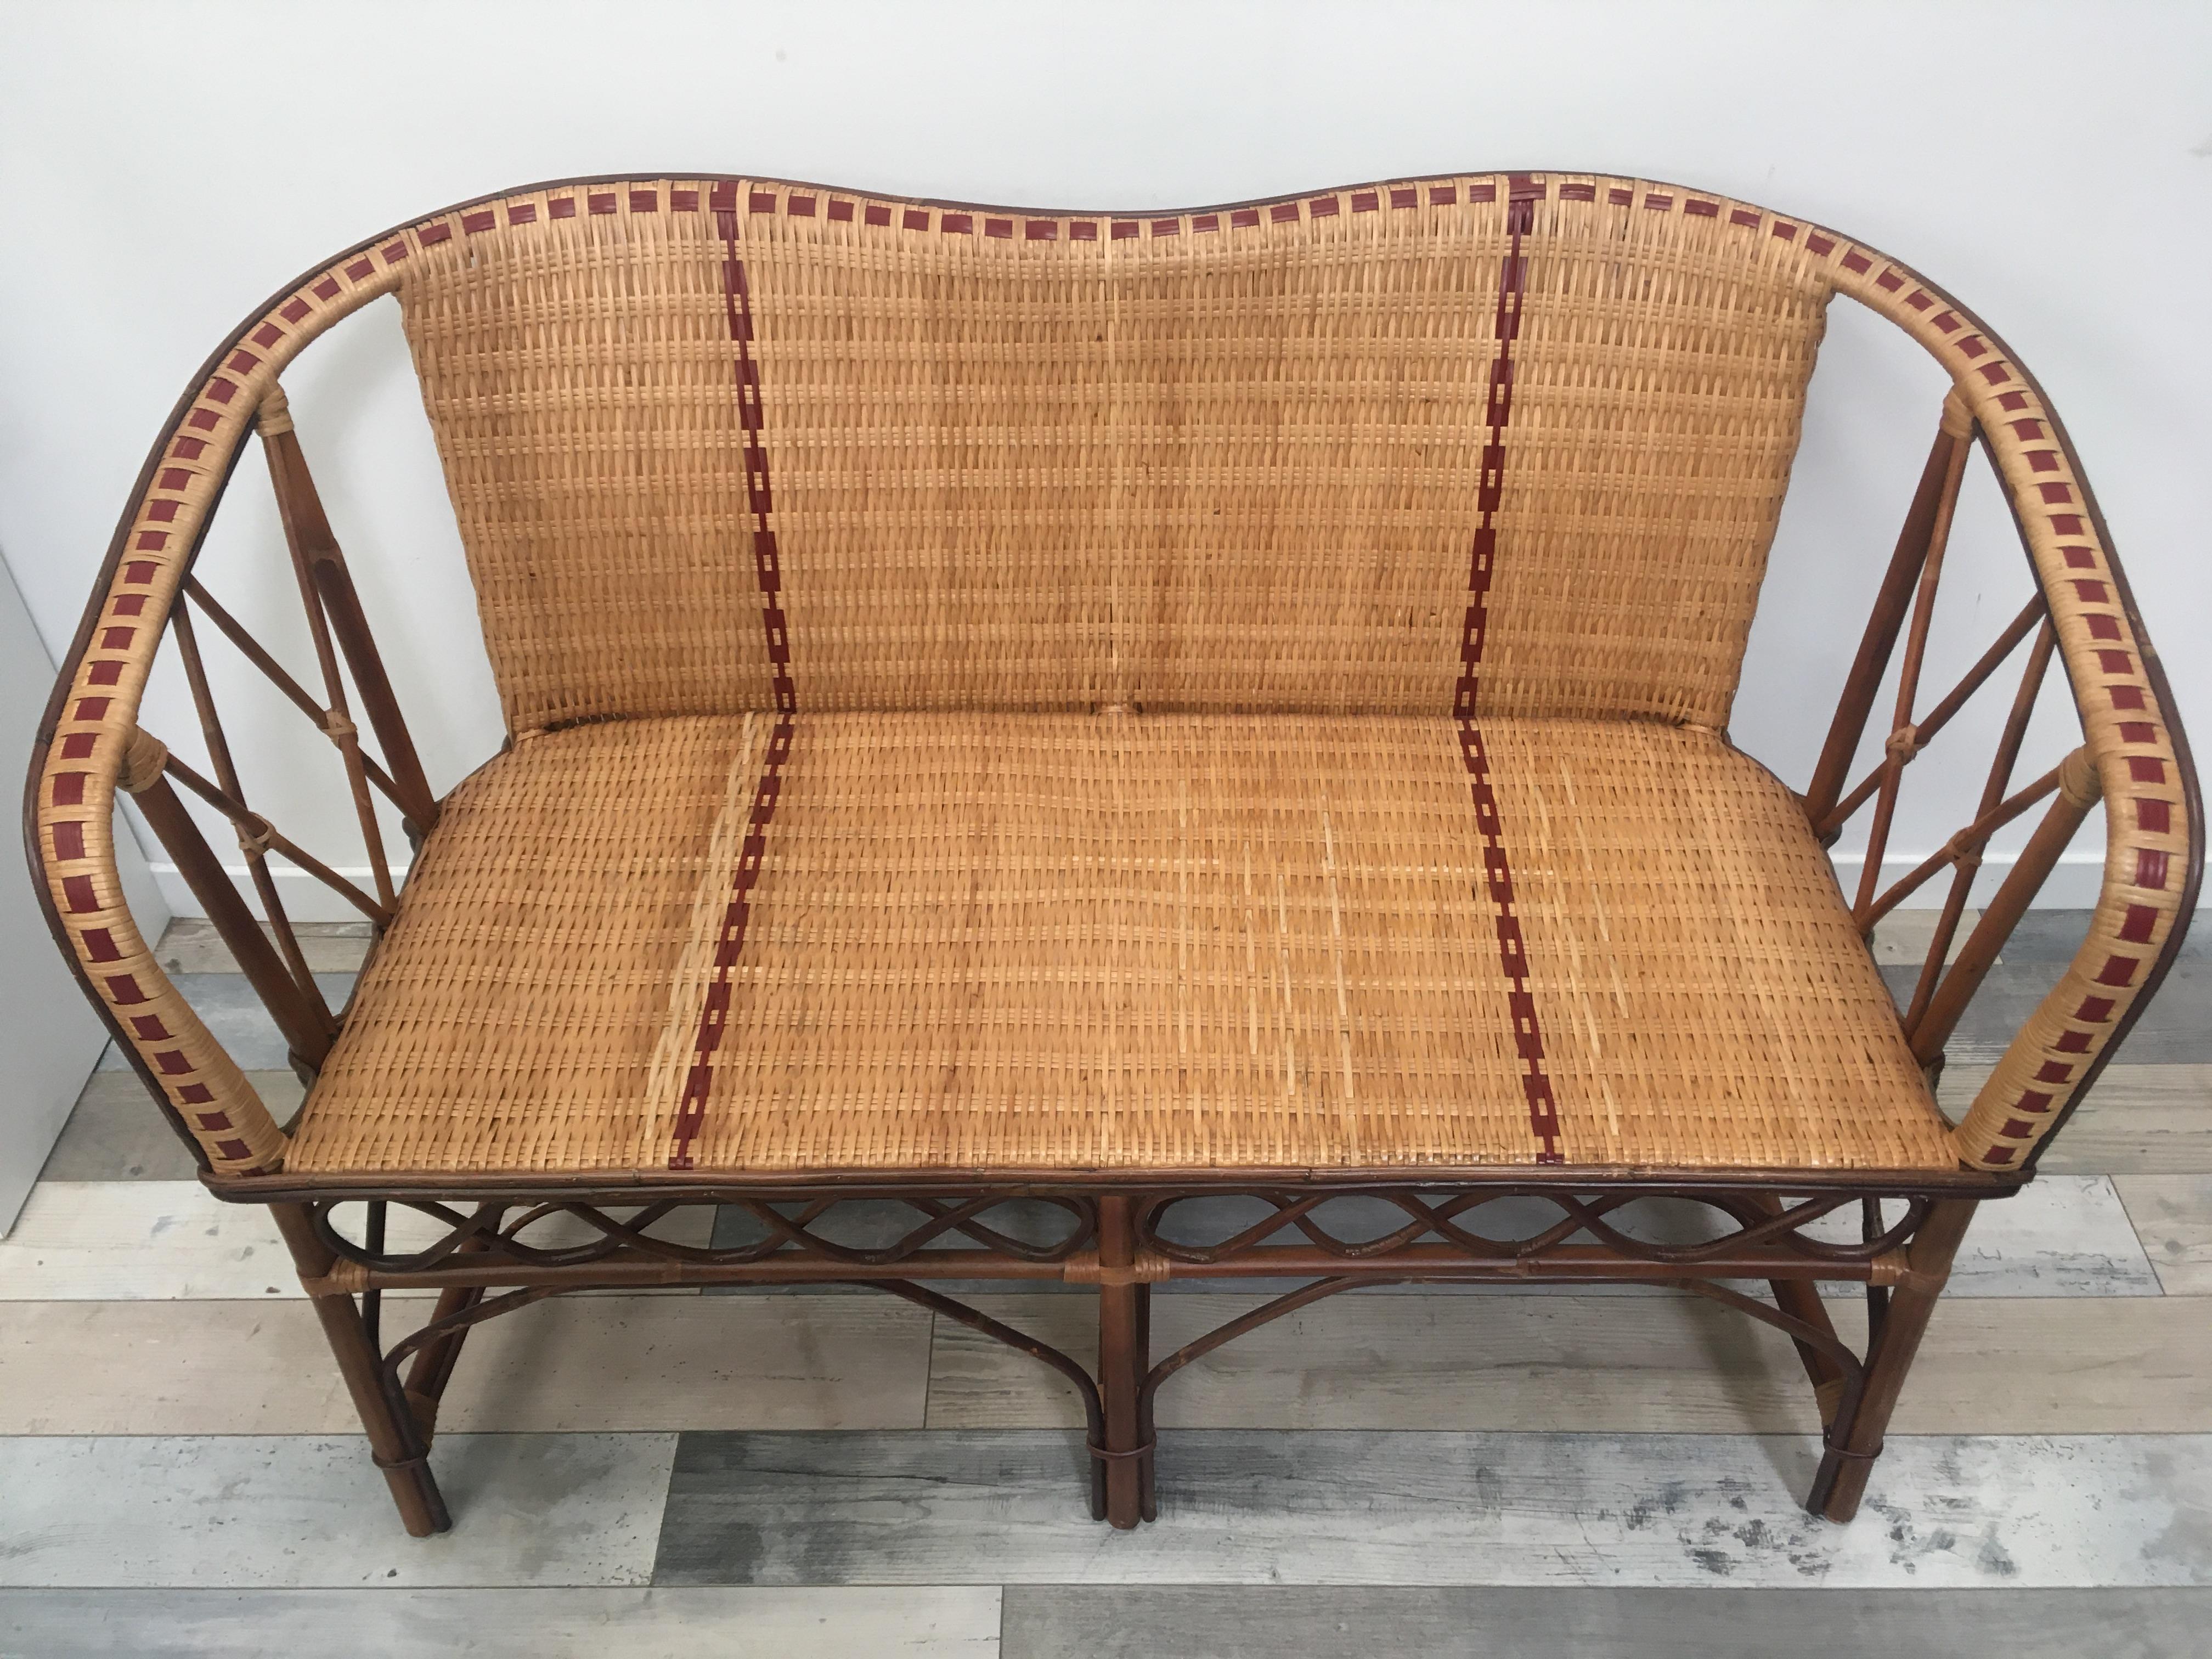 French 1900s Design Bistro Style Sofa In Rattan and Braided Wicker Cane For Sale 2